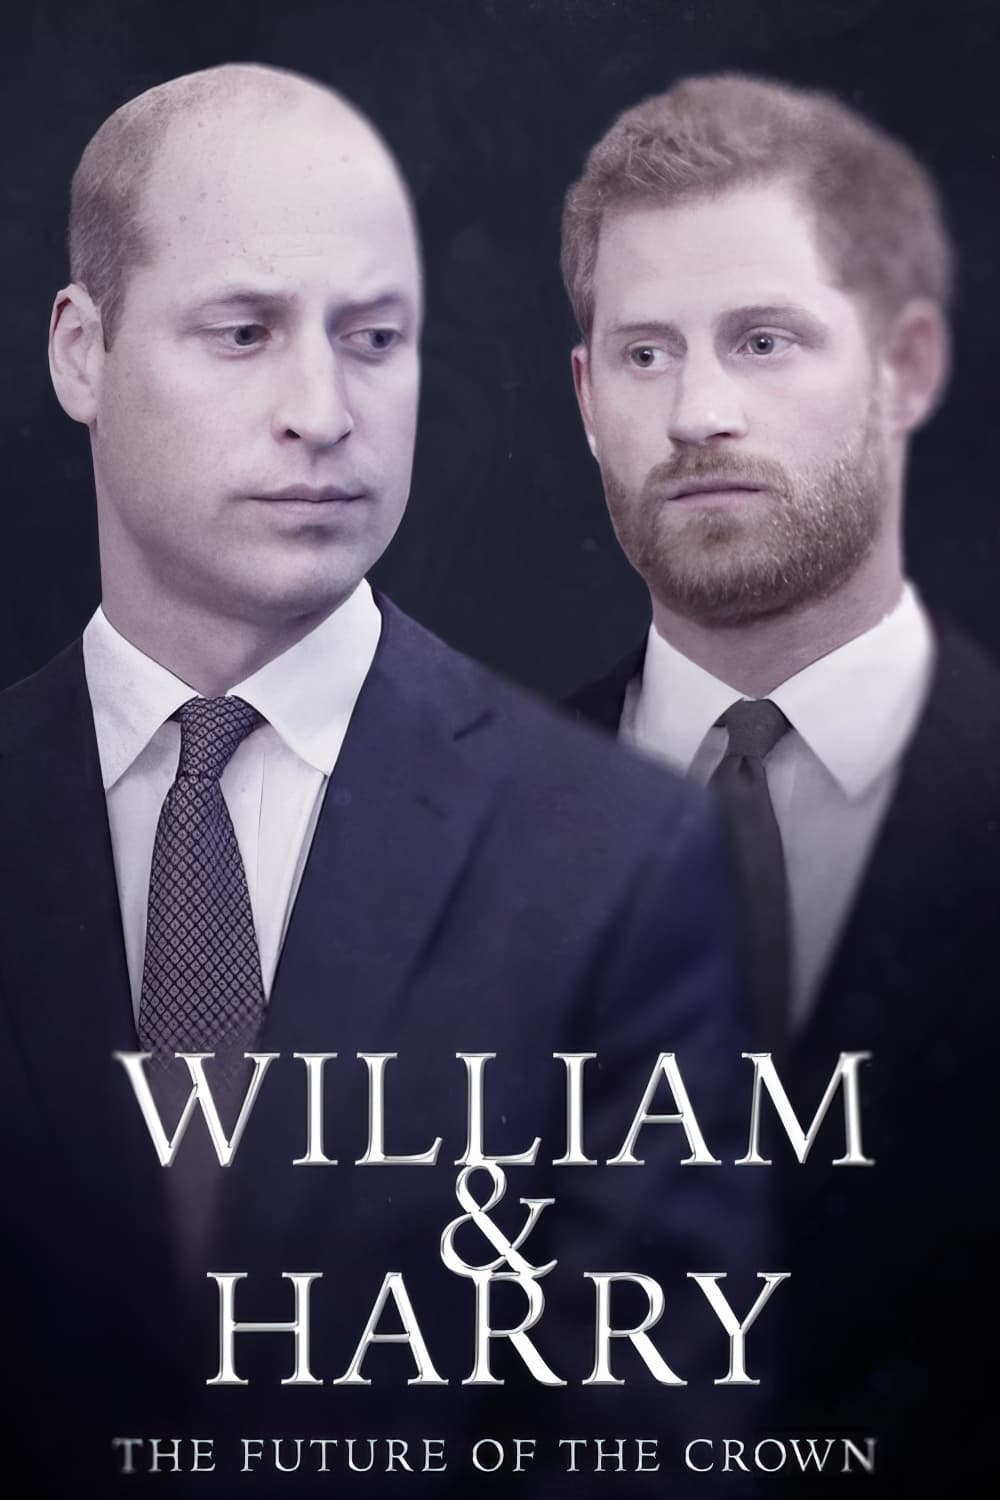 William & Harry: The Future of the Crown